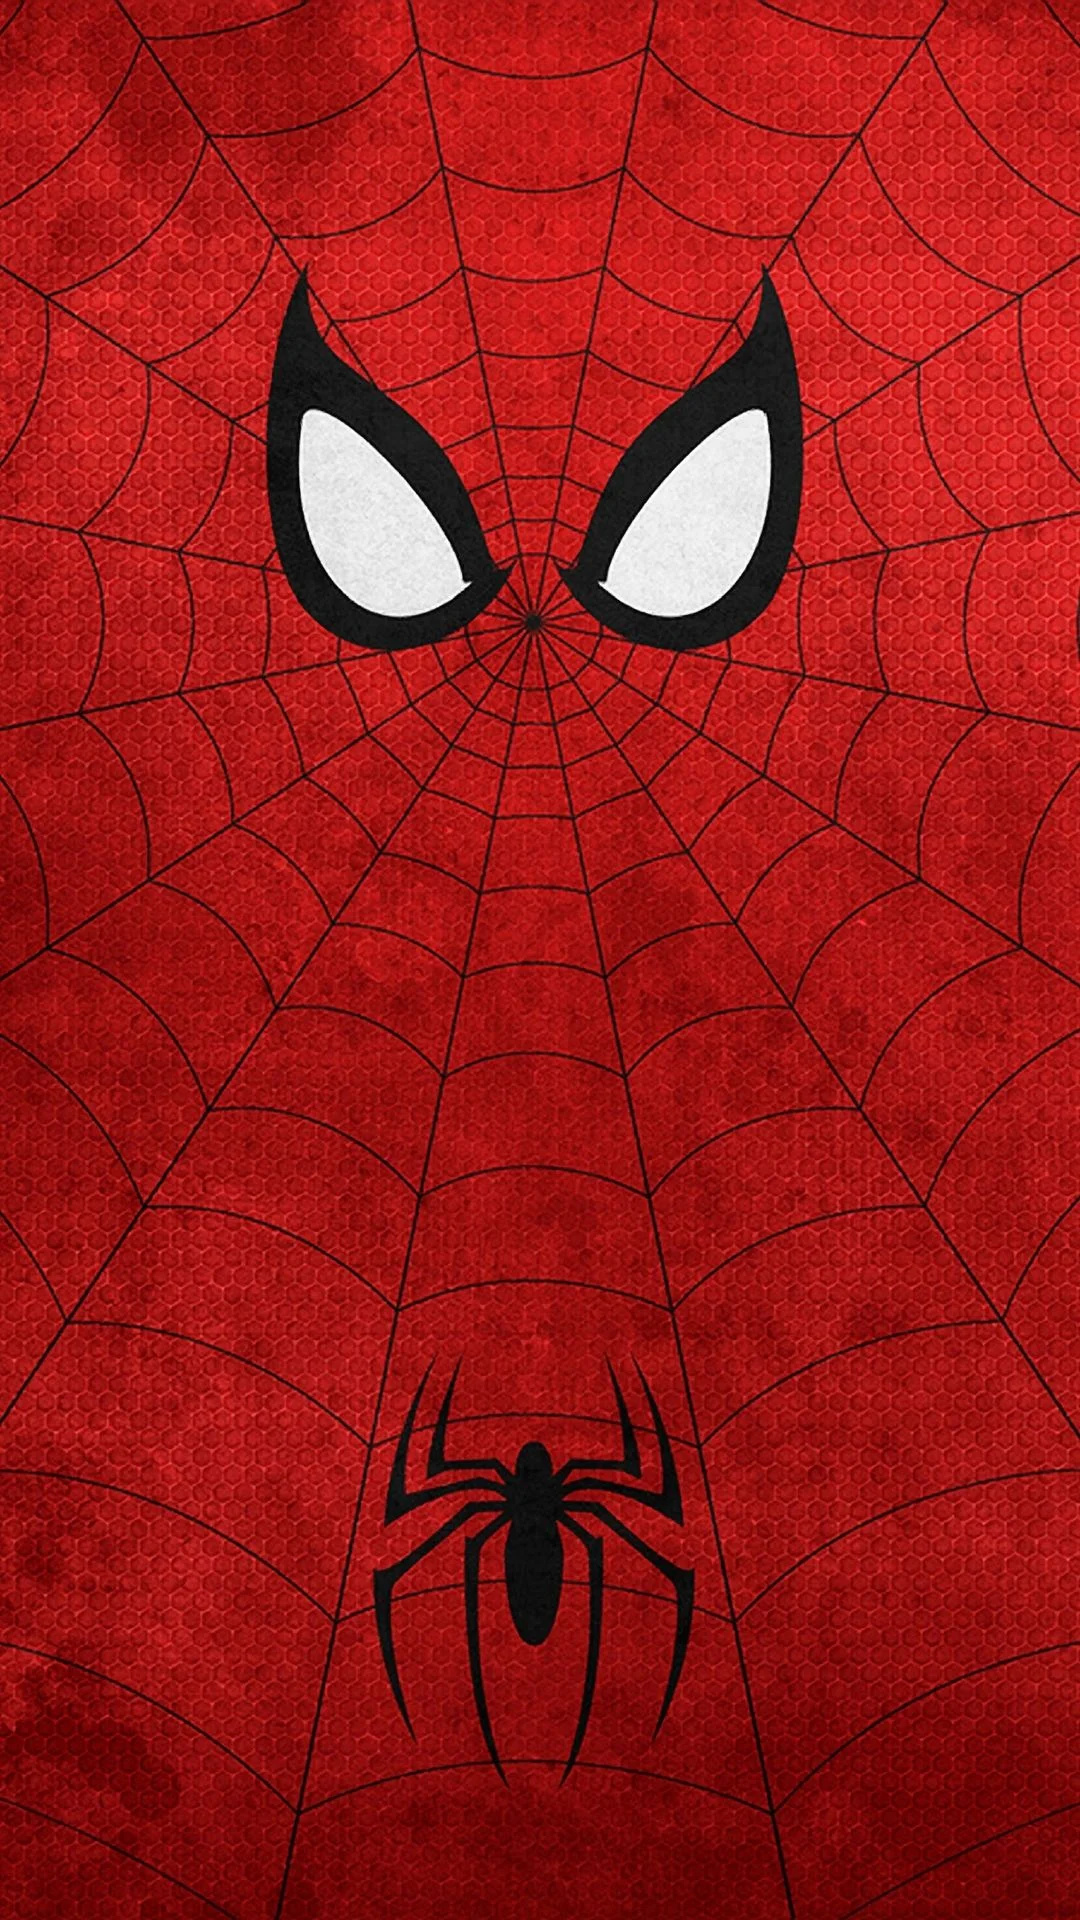 Spider-Man cellphone wallpapers, Top free backgrounds, 1080x1920 Full HD Handy